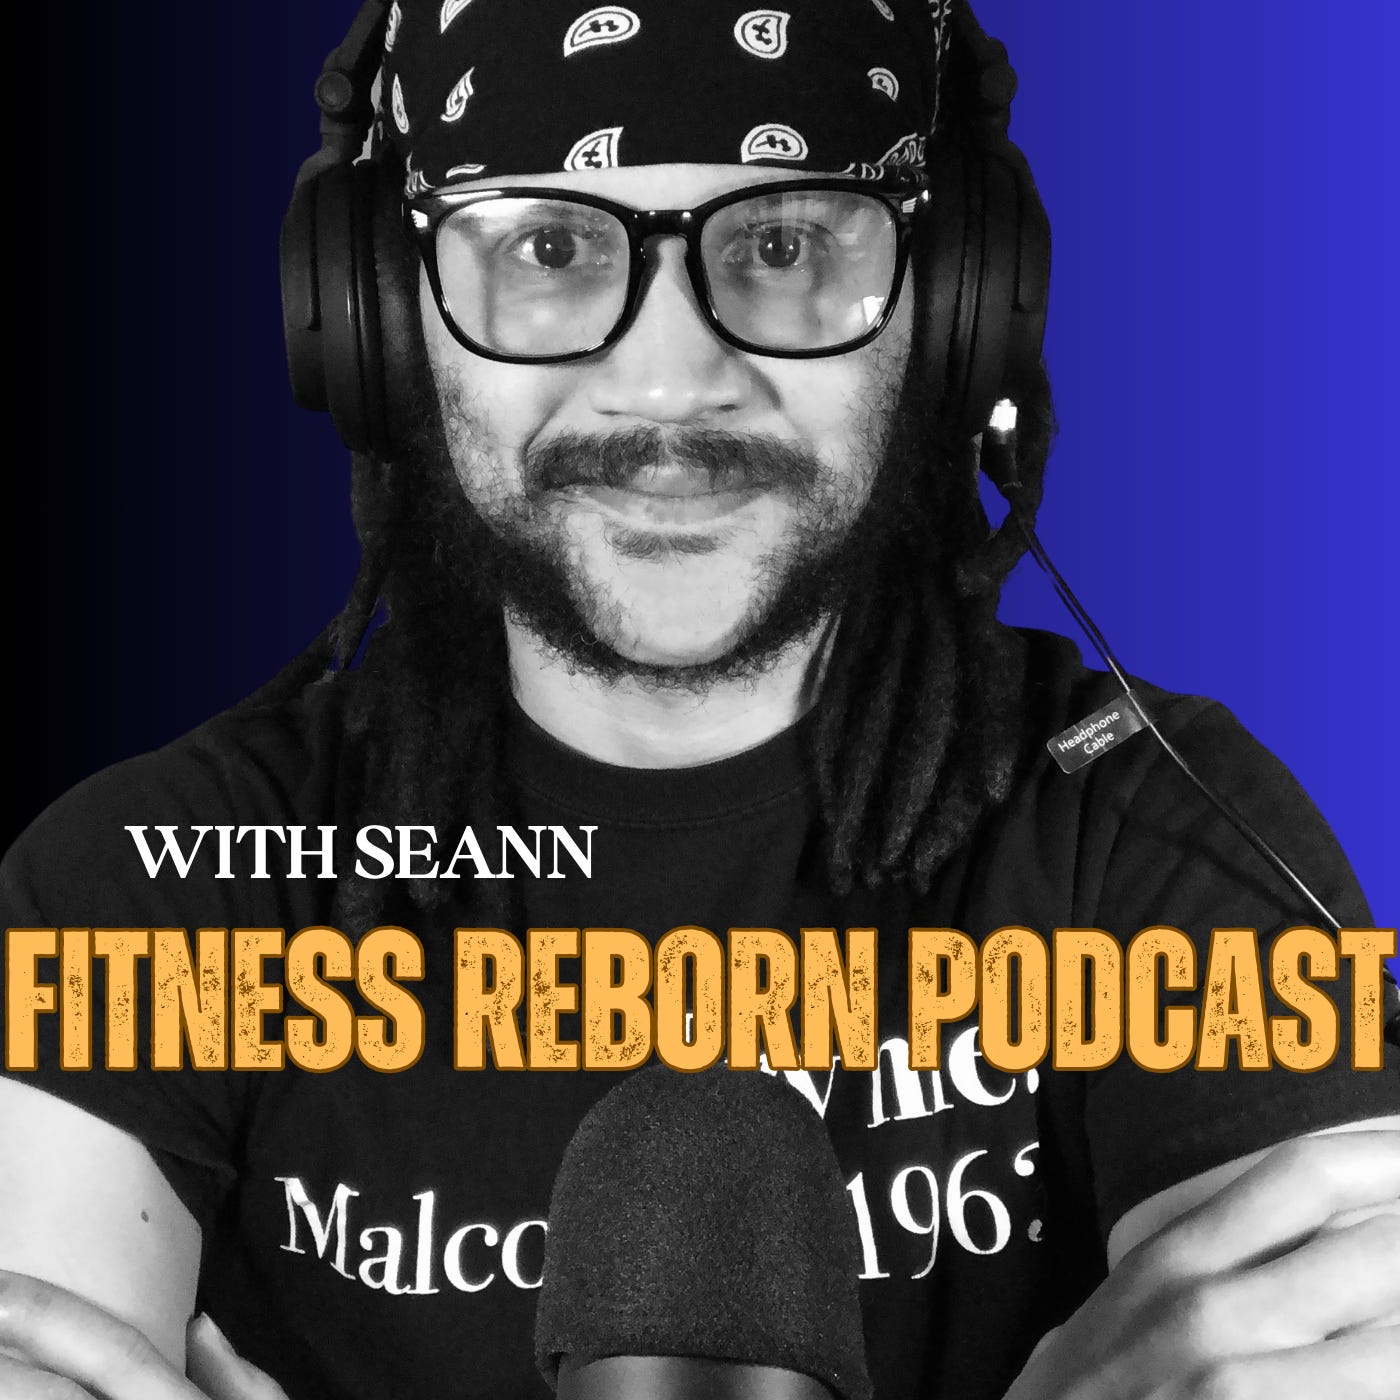 Fitness Reborn with Seann, E84: Fitness Adventures with Kelly Howard